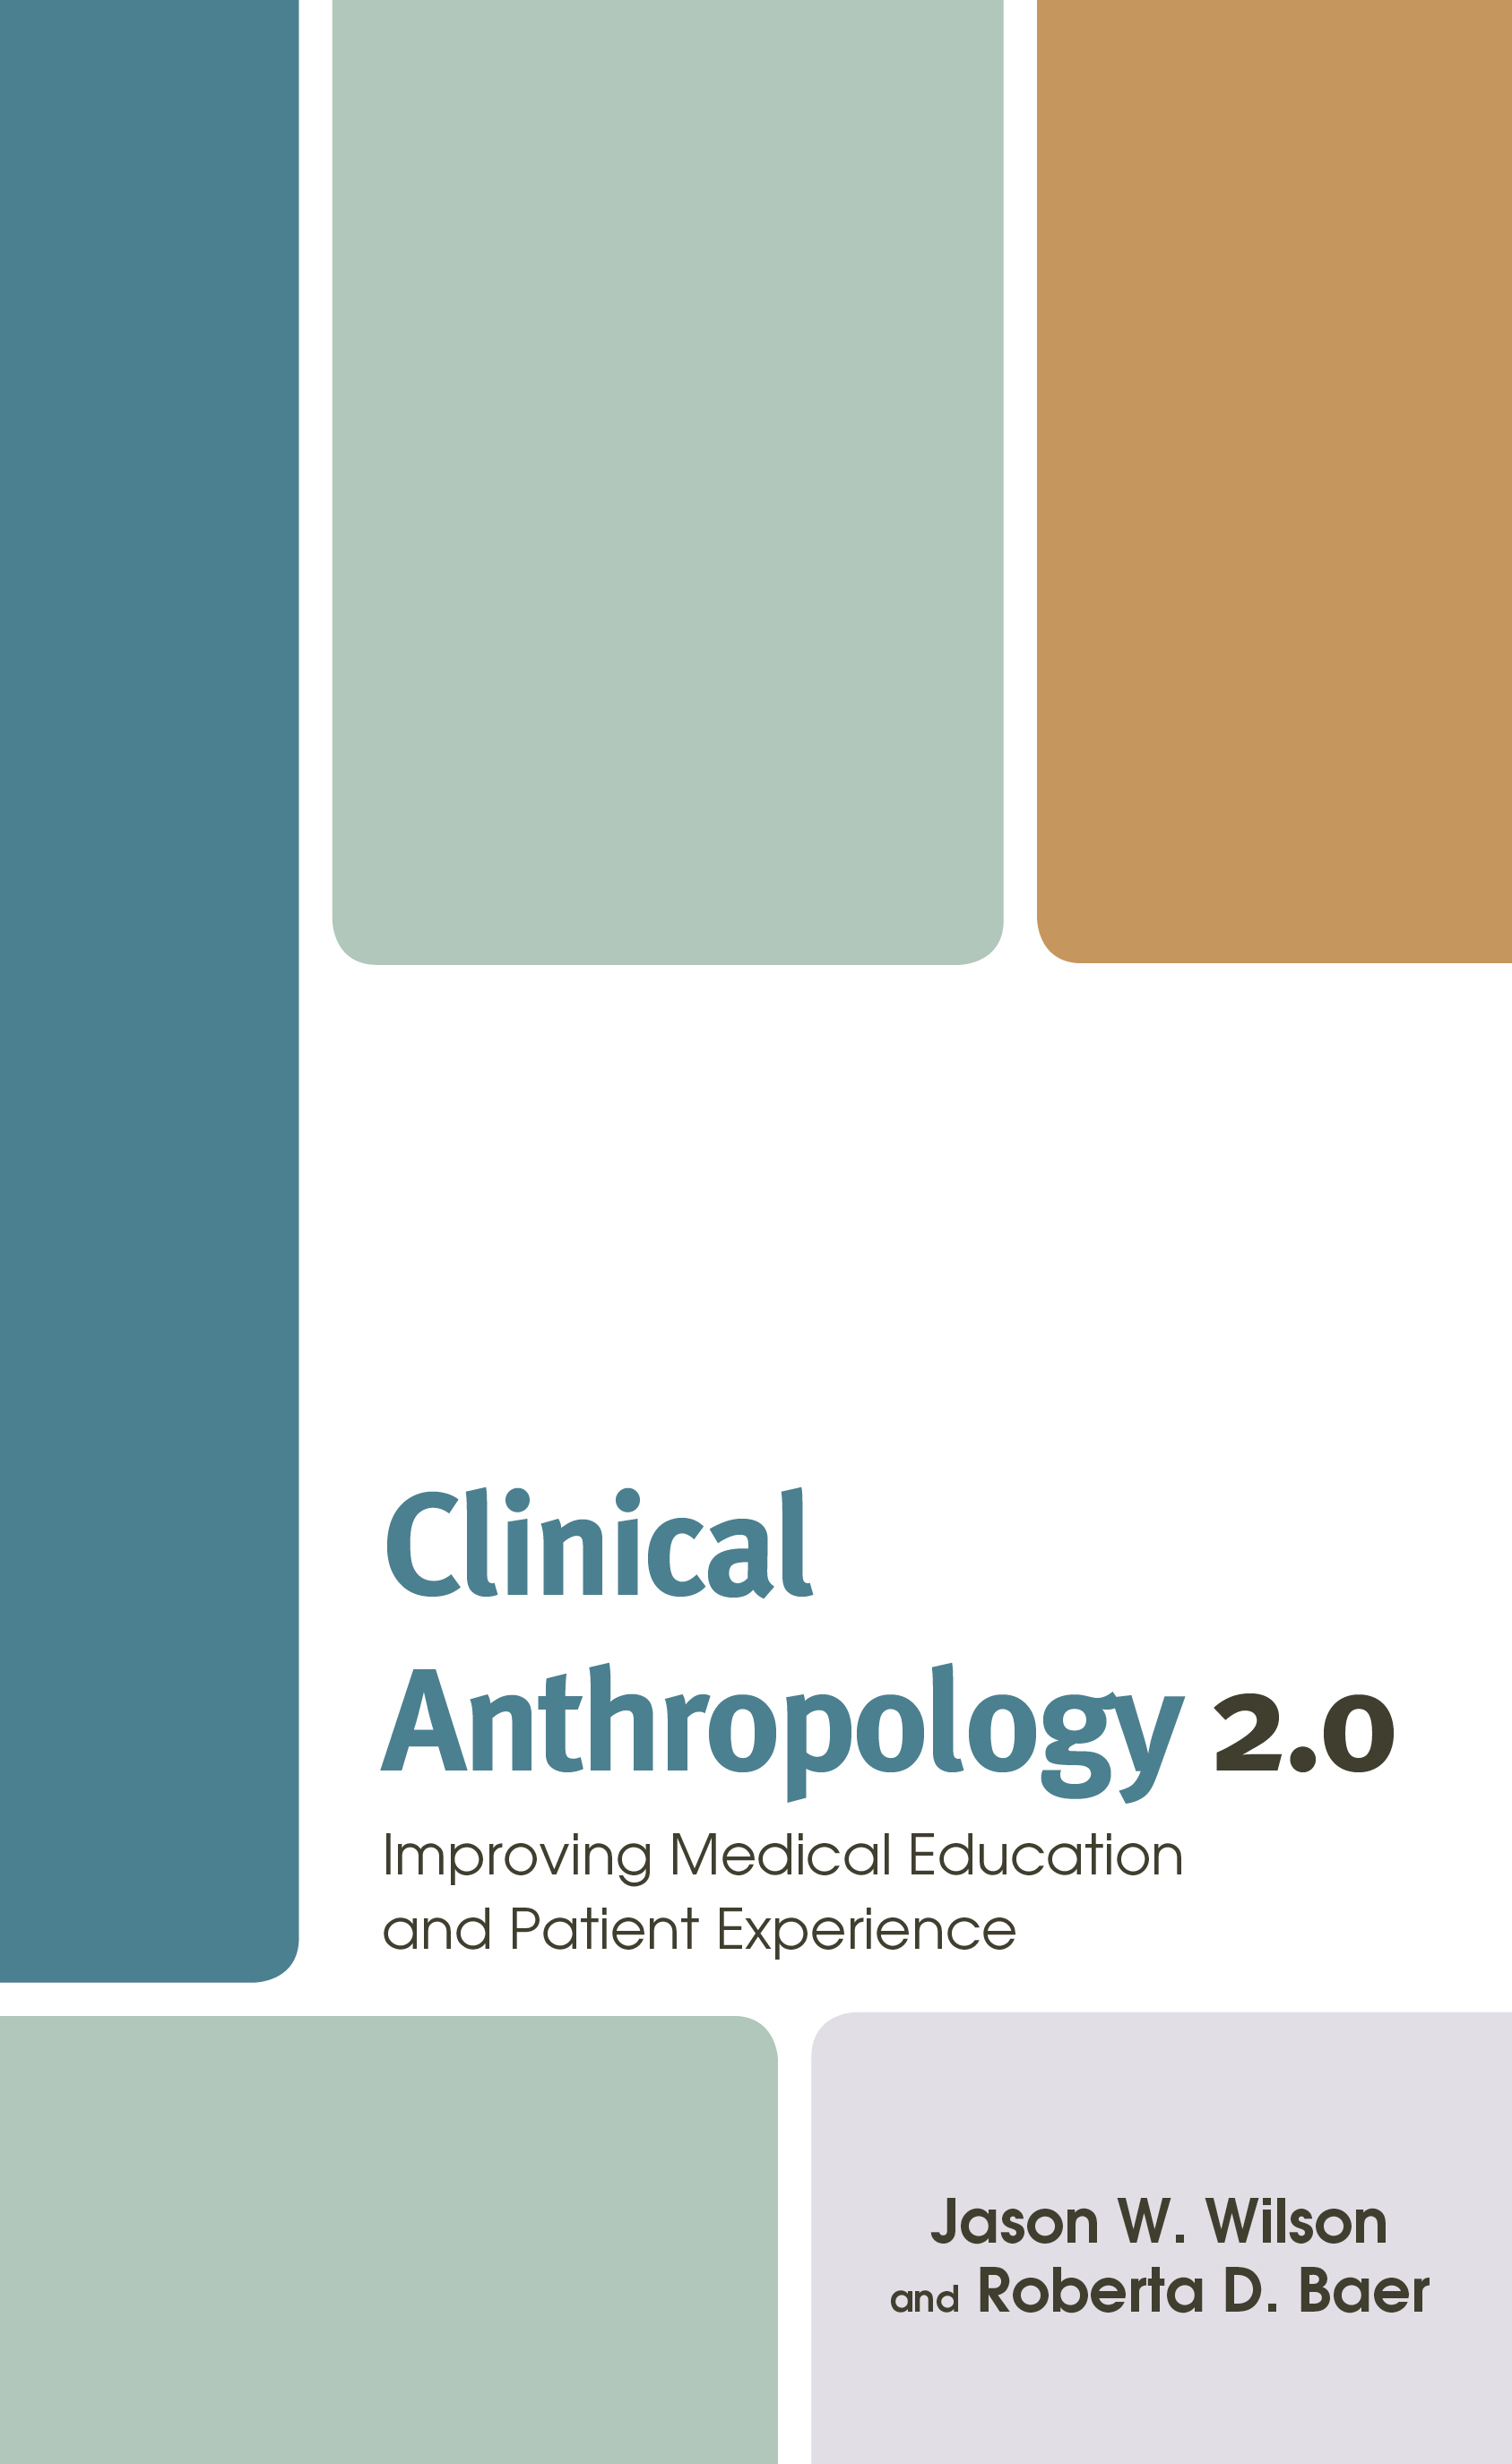 Clinical Anthropology 2.0: Improving Medical Education and Patient Experience